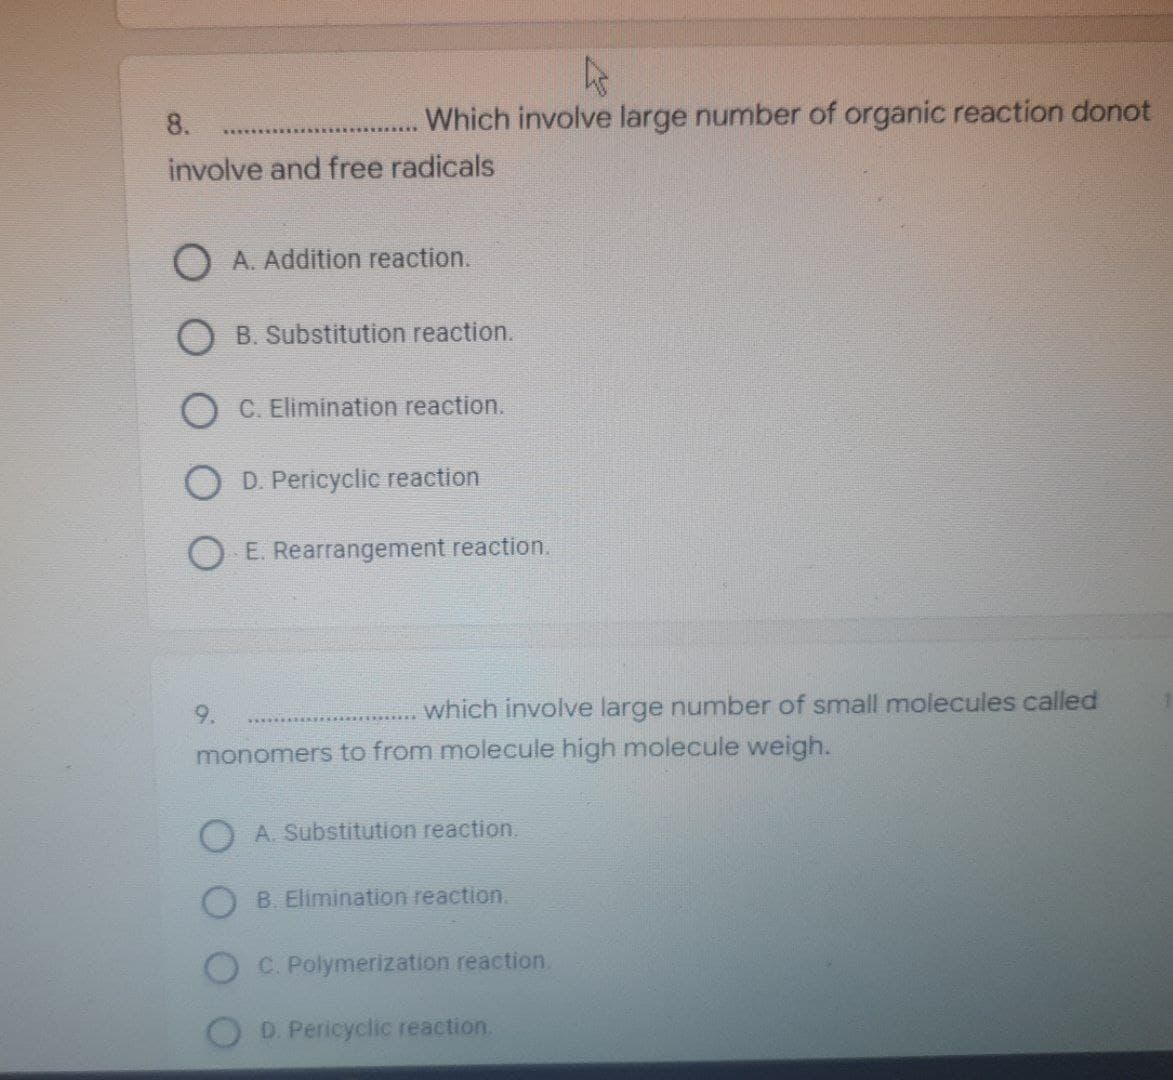 4
Which involve large number of organic reaction donot
which involve large number of small molecules called
8.
involve and free radicals
O A. Addition reaction.
B. Substitution reaction.
OC. Elimination reaction.
O D. Pericyclic reaction
O E. Rearrangement reaction.
9.
monomers to from molecule high molecule weigh.
A. Substitution reaction.
B. Elimination reaction.
C. Polymerization reaction.
D. Pericyclic reaction.